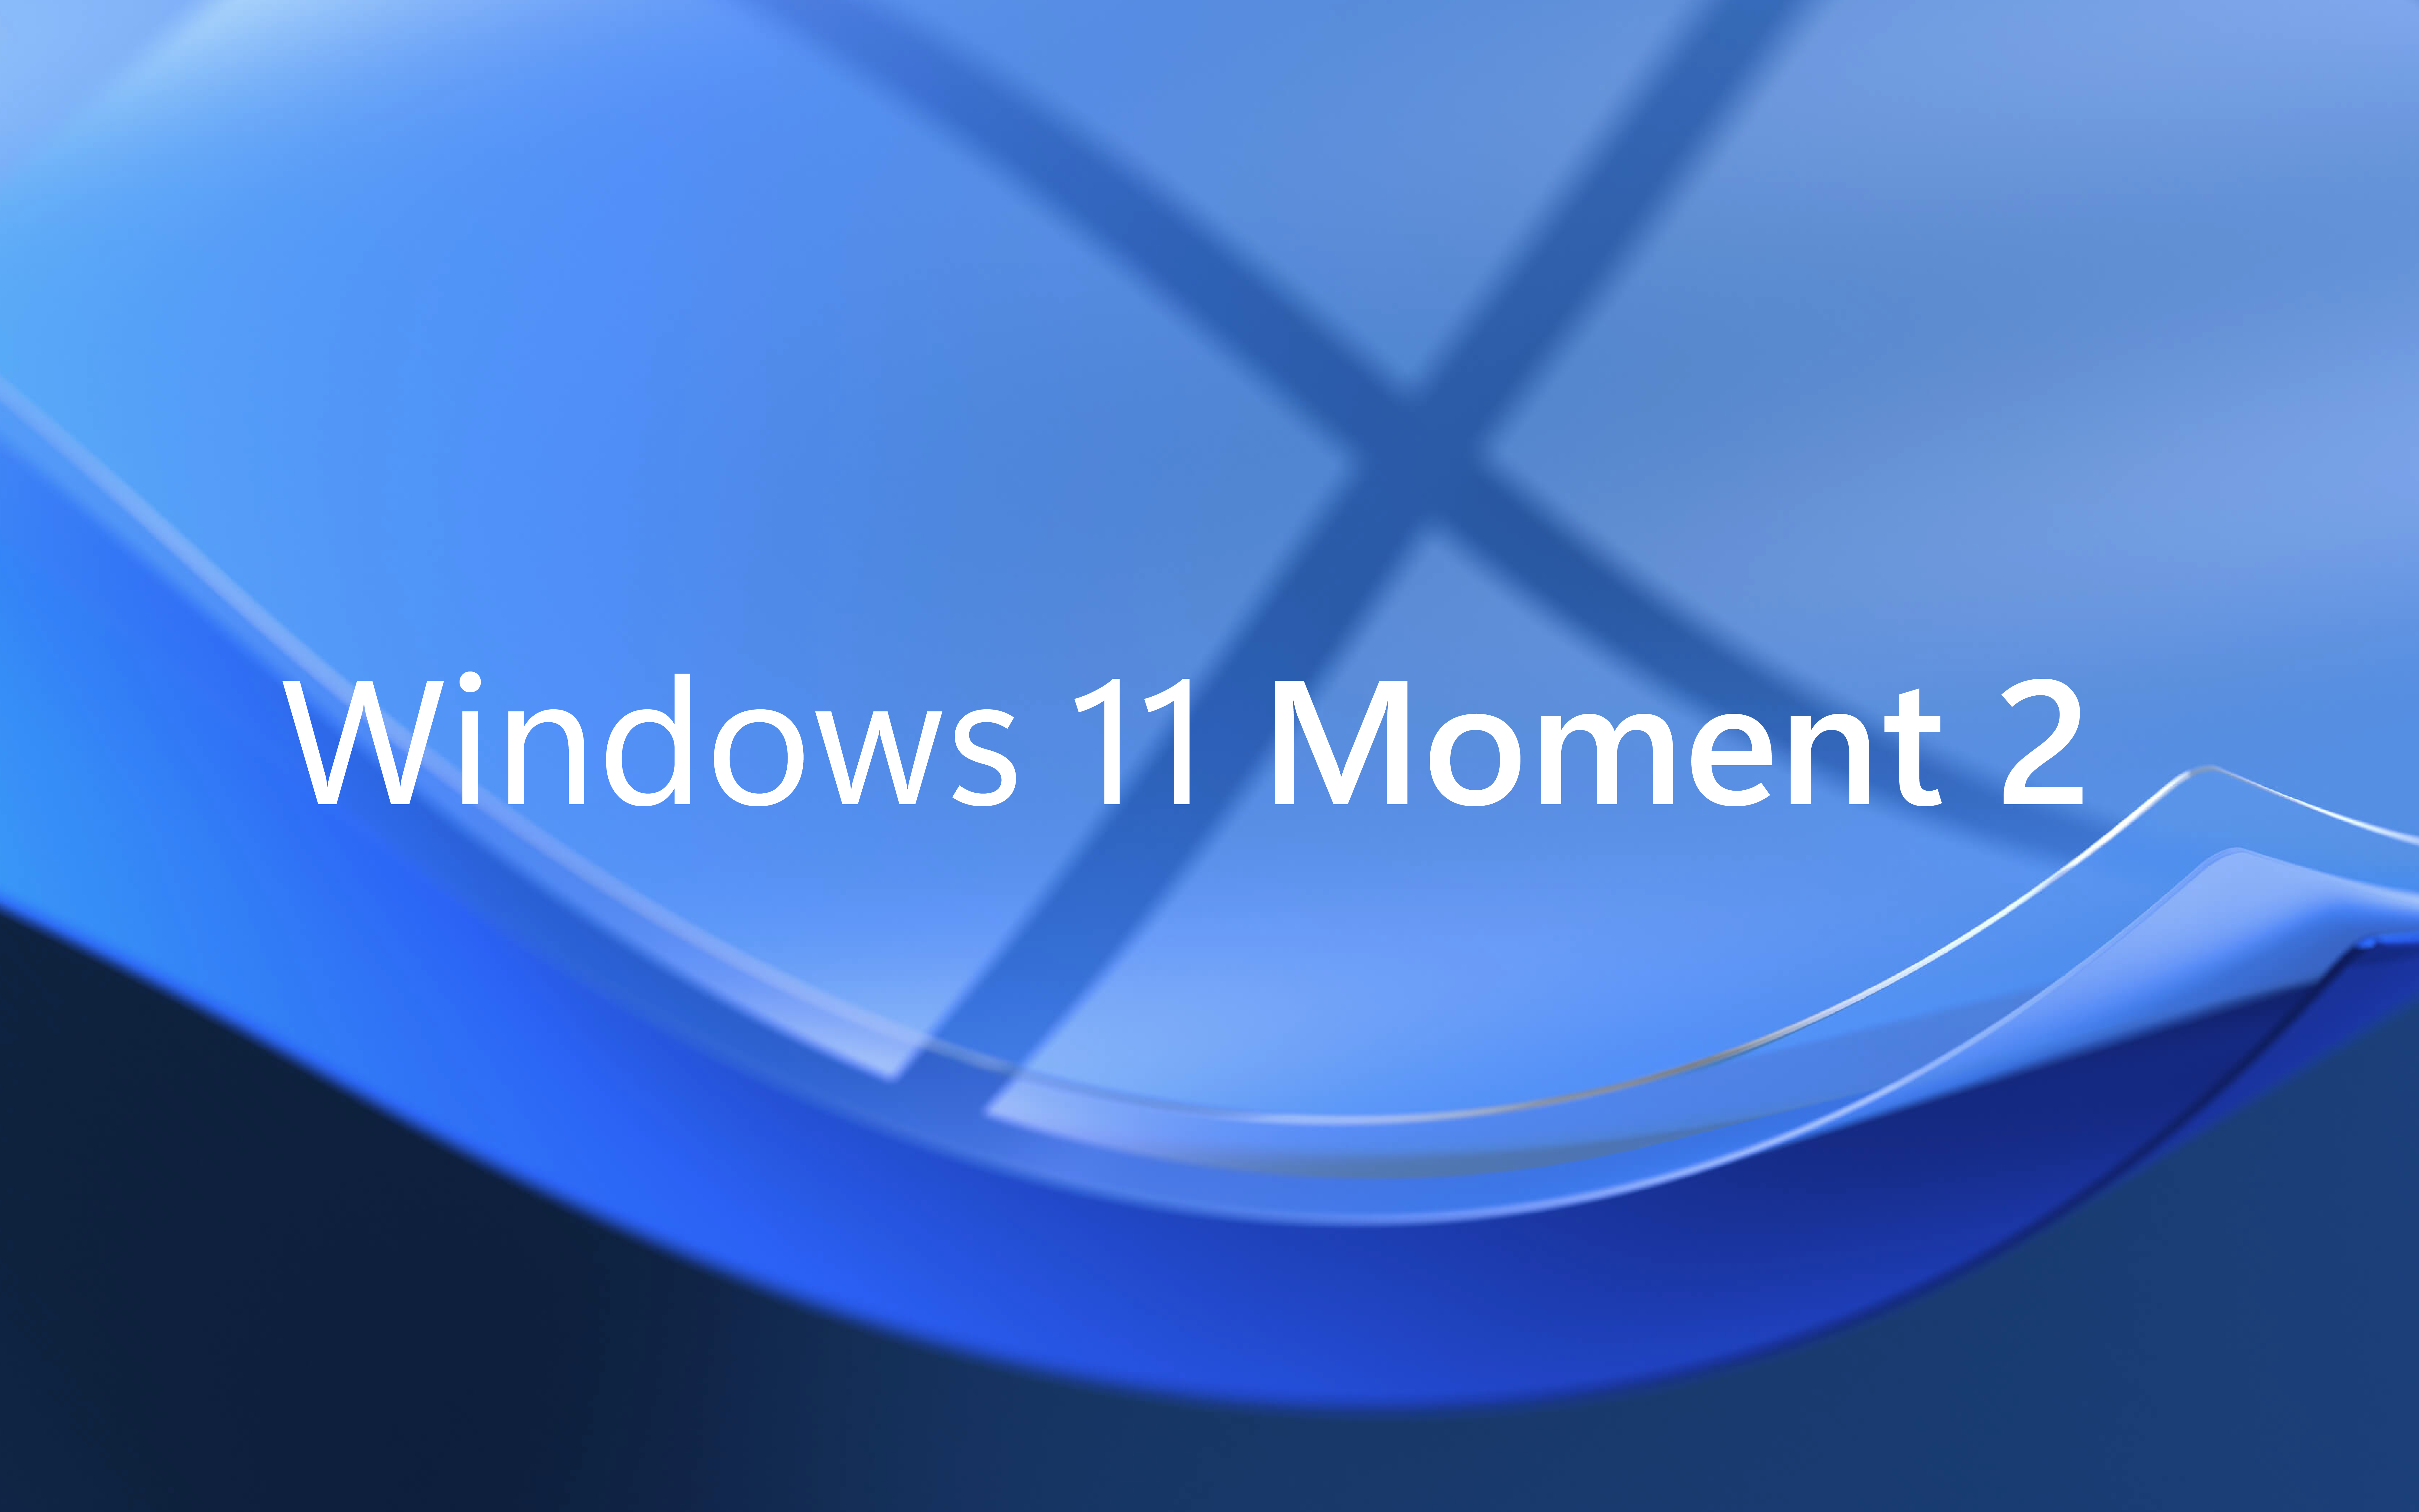 Windows 11 'Moment 2' Update: A Game-Changer in the Era of AI?